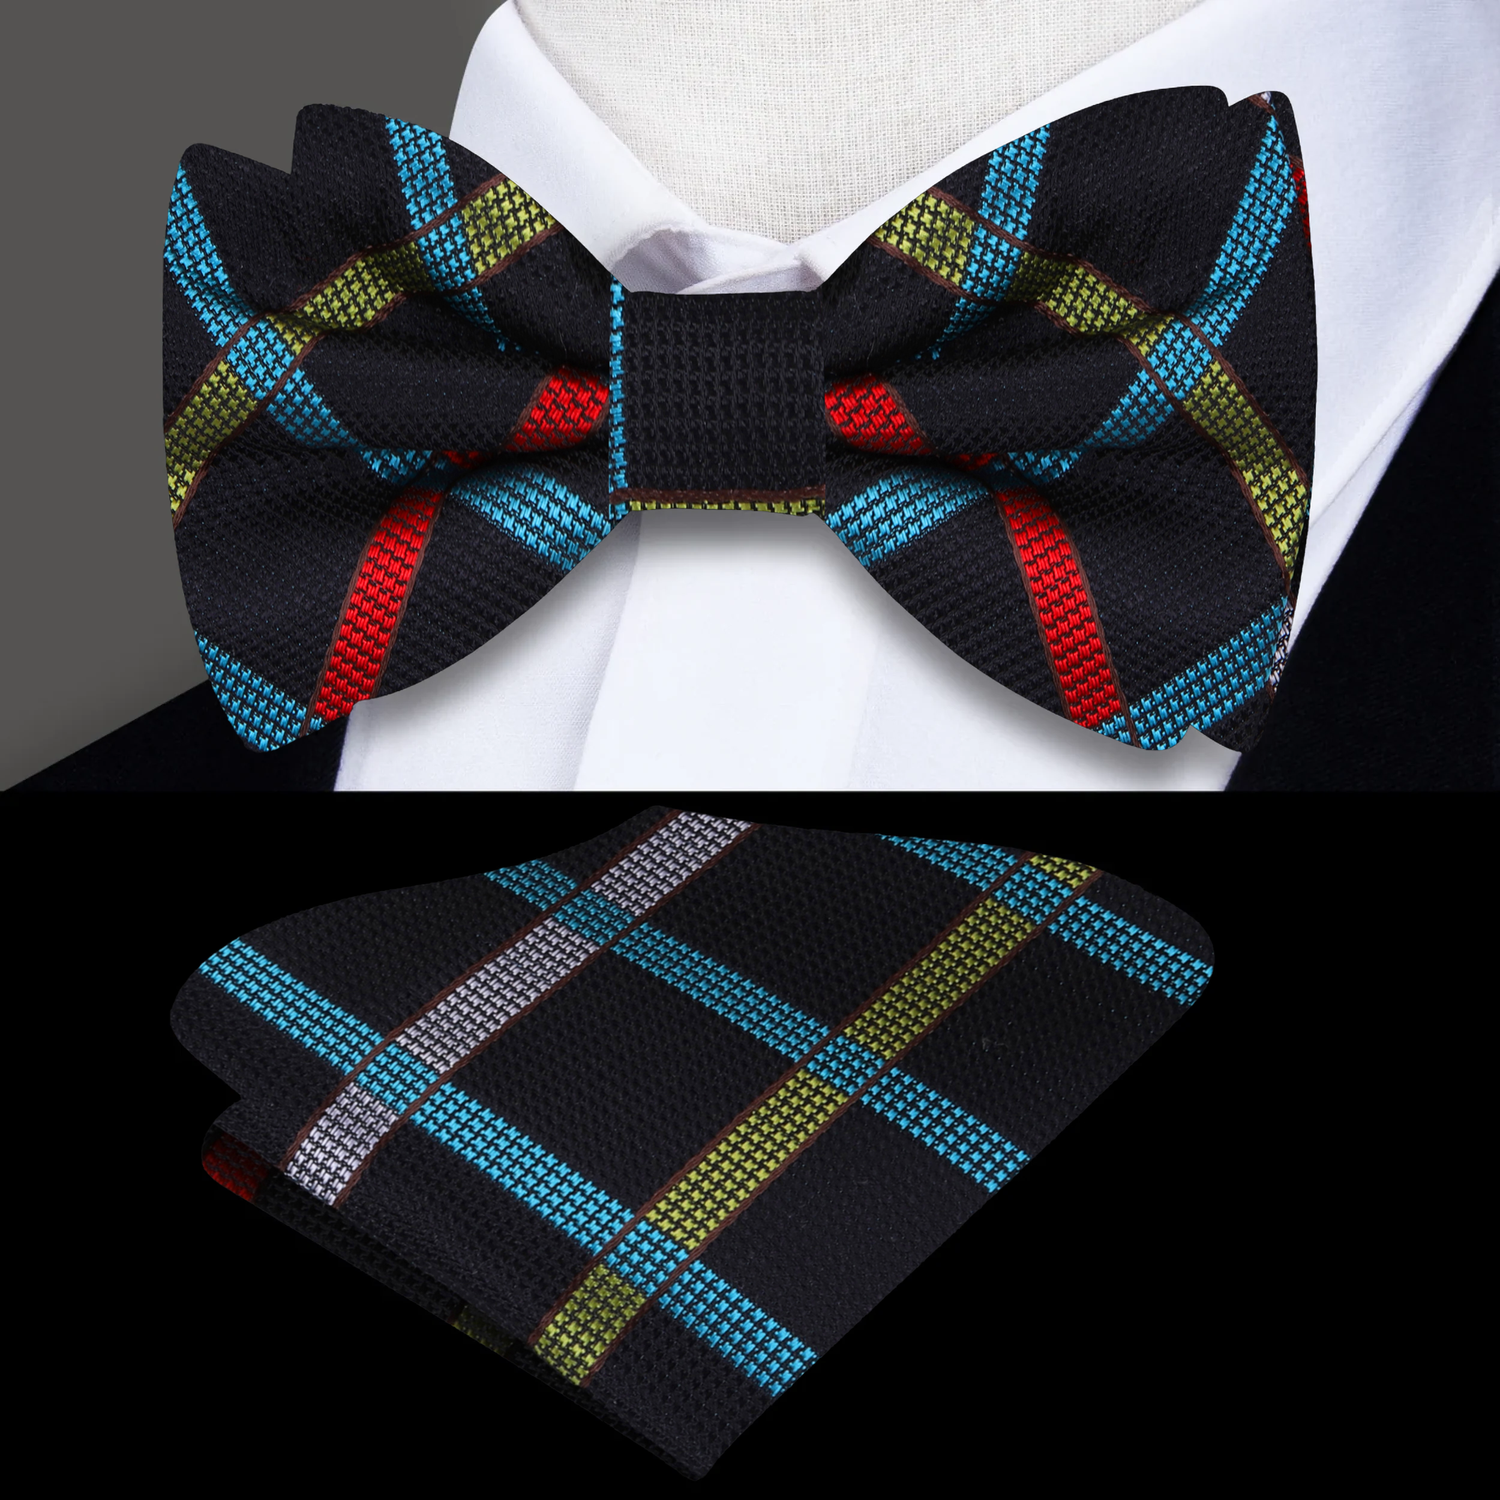 Black, Red, Yellow and Grey Plaid Bow Tie and Pocket Square